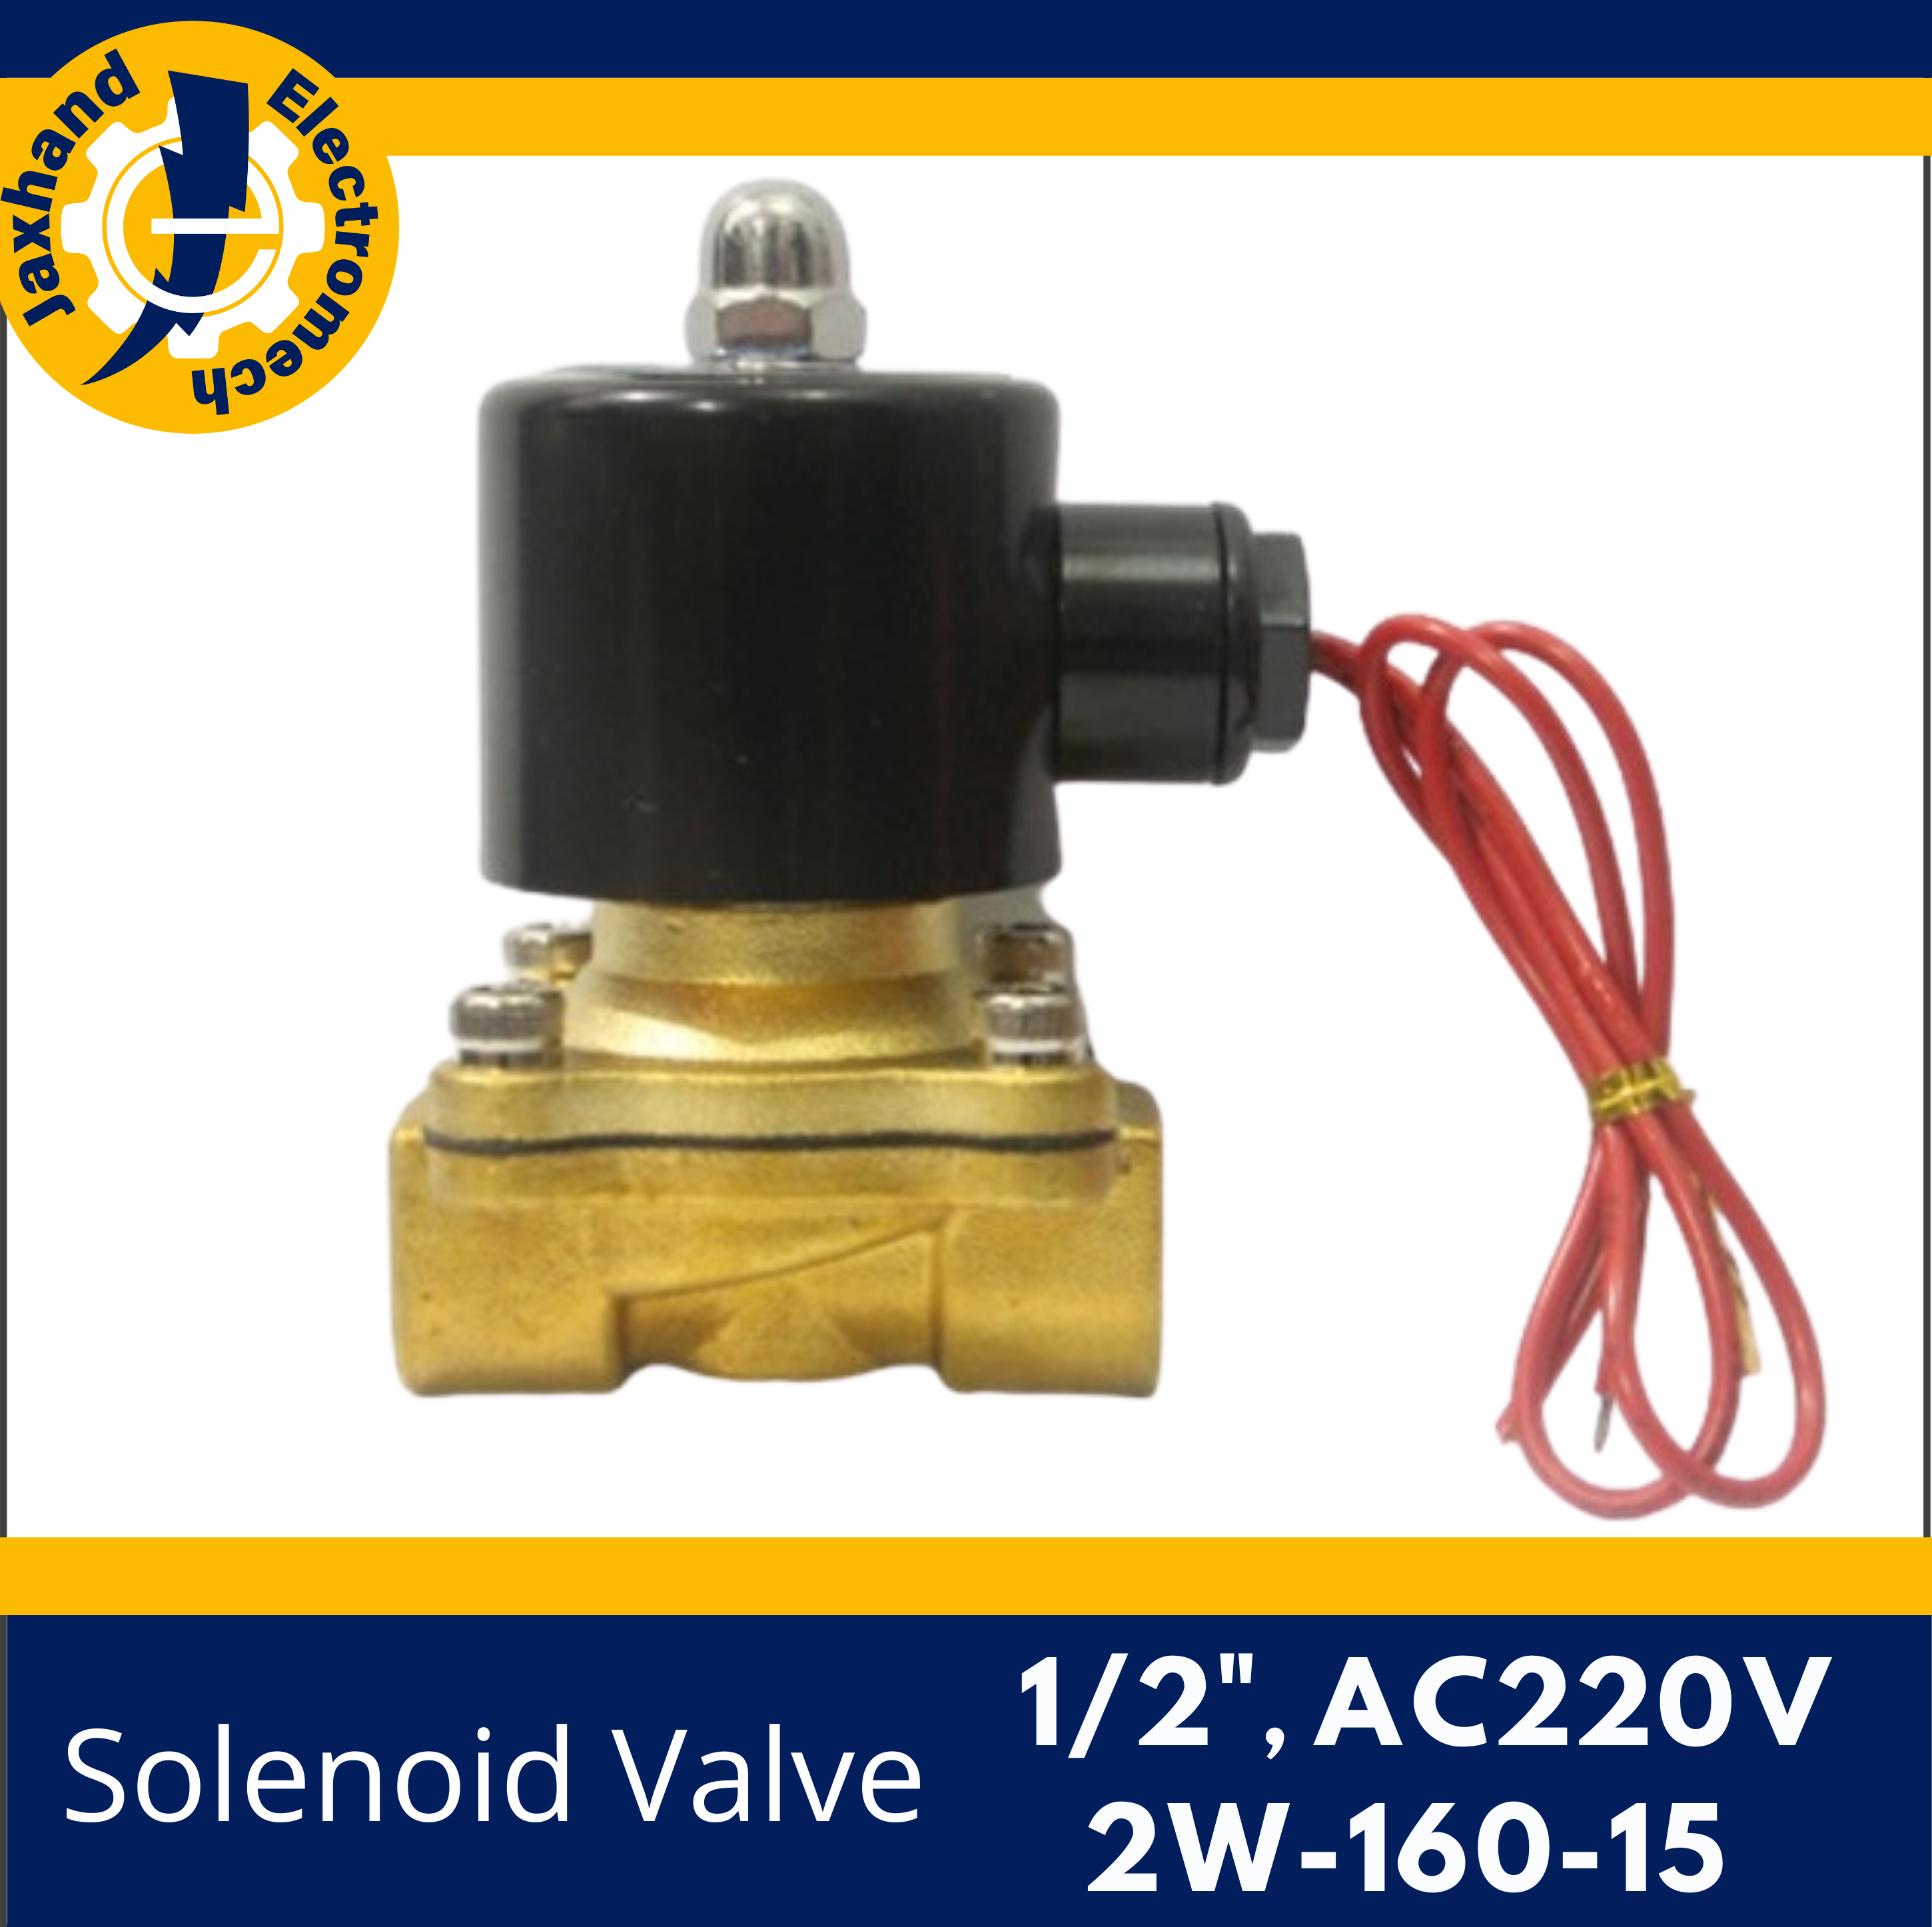 1/2 AC 220V Electric Solenoid Valve Pneumatic Valve for Water Oil Air NC 2W-160-15 